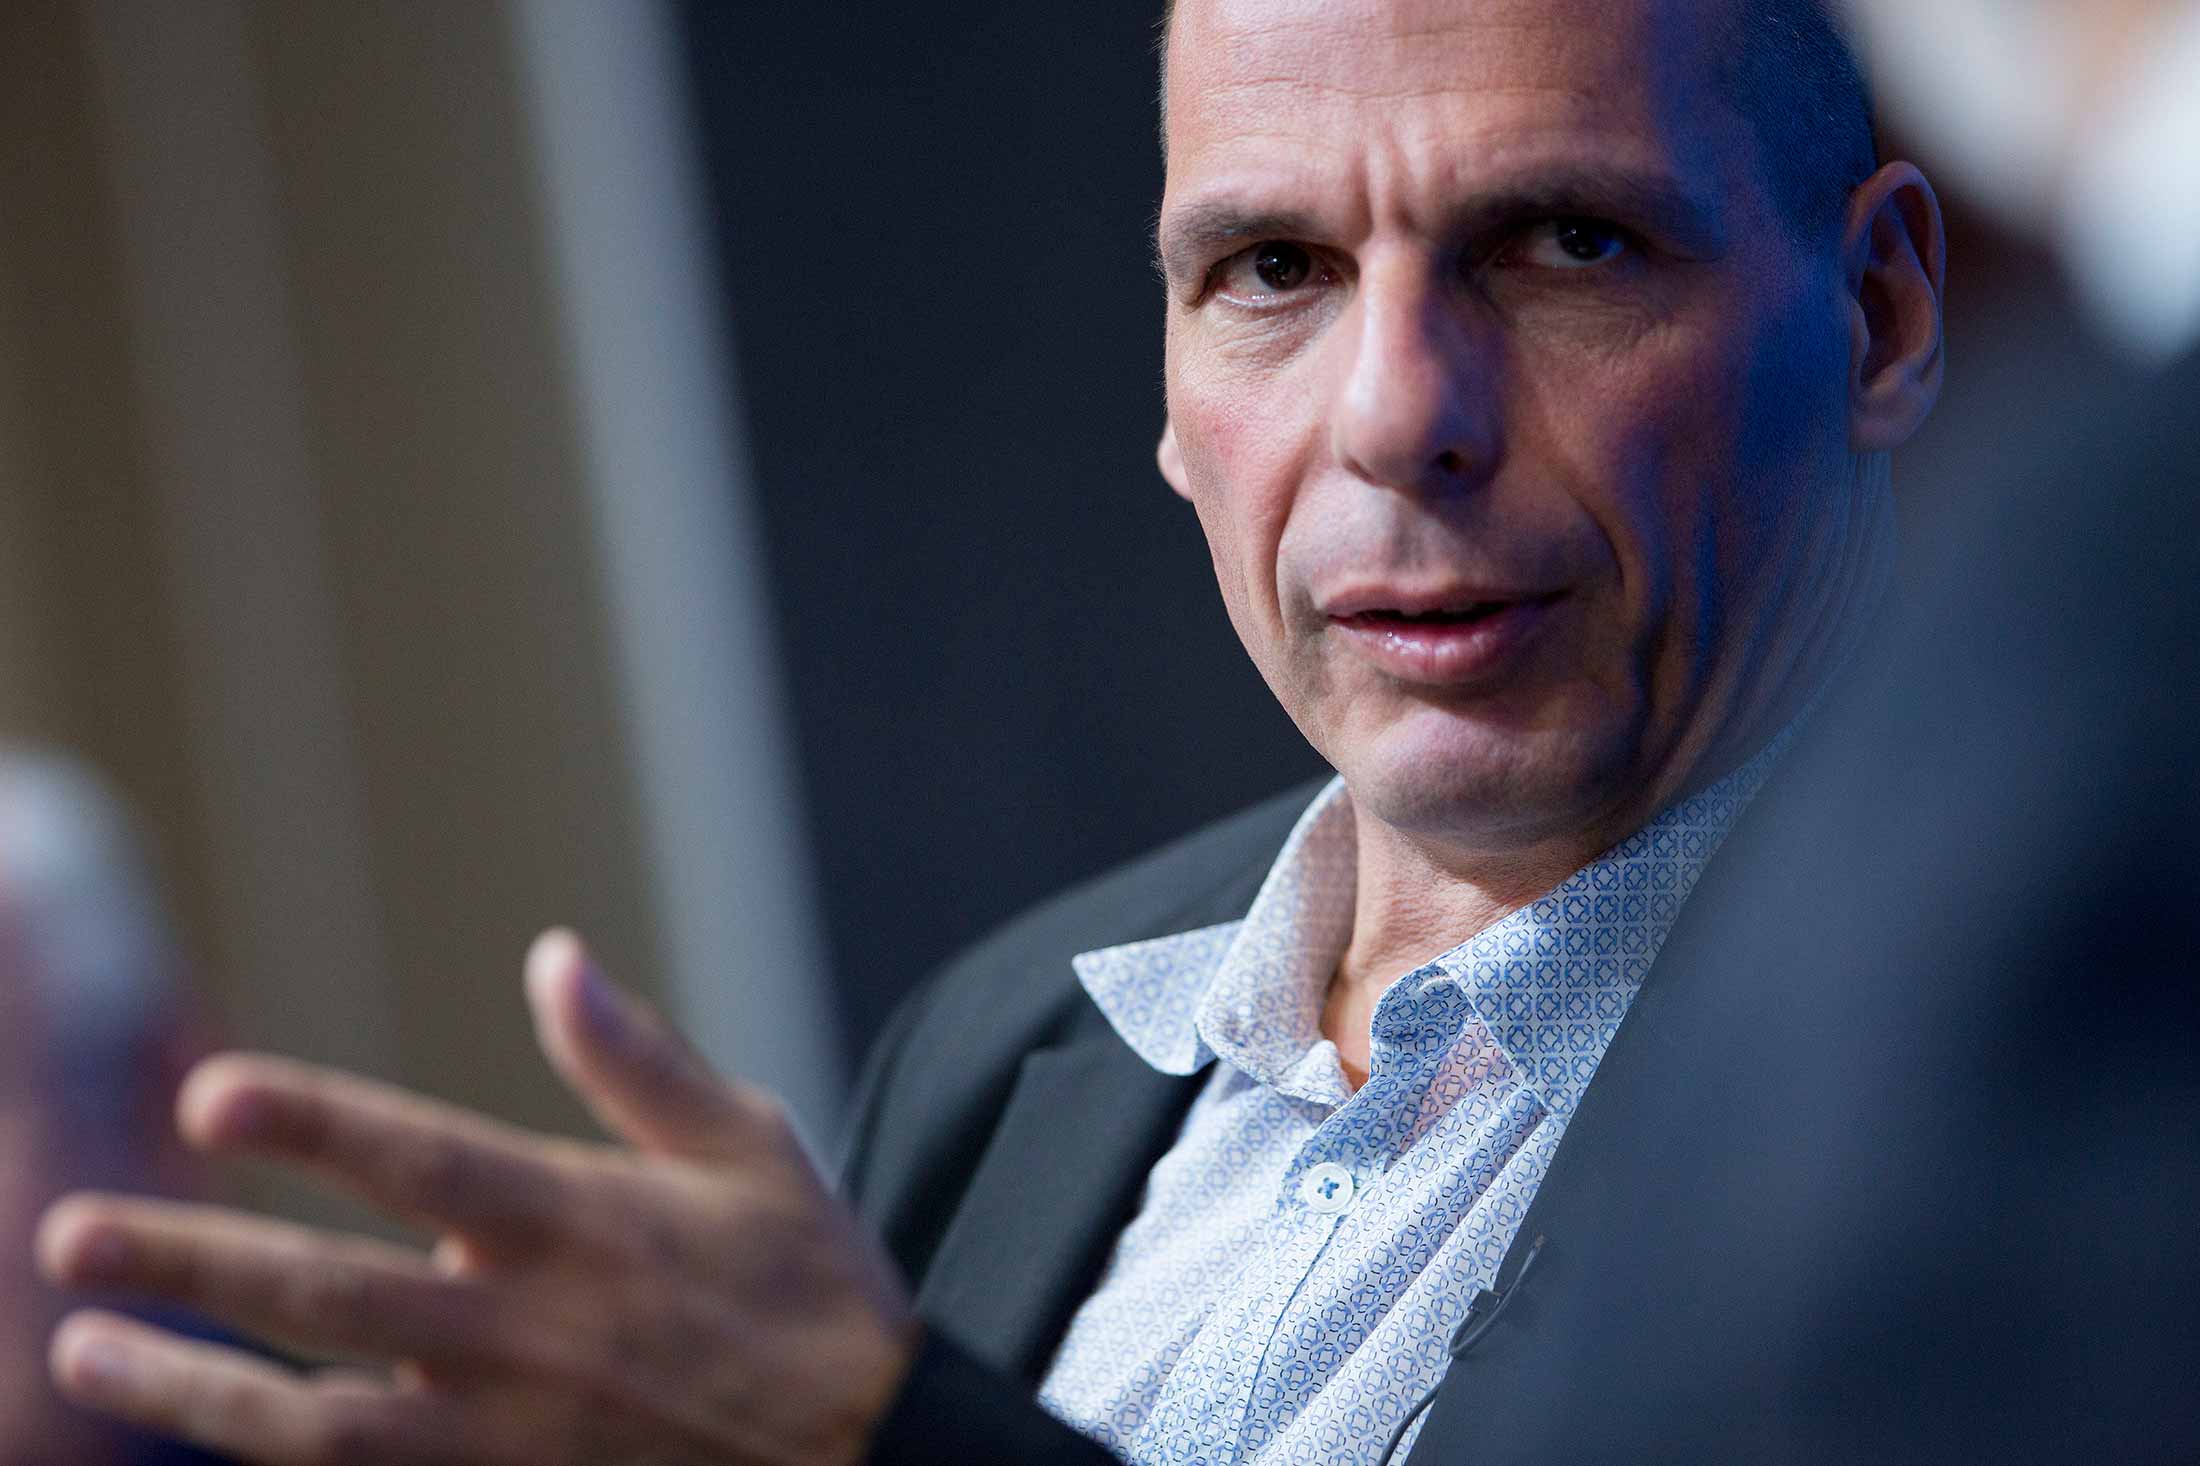 Yanis Varoufakis, Greece's finance minister, speaks during a panel discussion at the Brookings Institution on the sidelines of the International Monetary Fund (IMF) and World Bank Group Spring Meetings in Washington, D.C., on April16.
